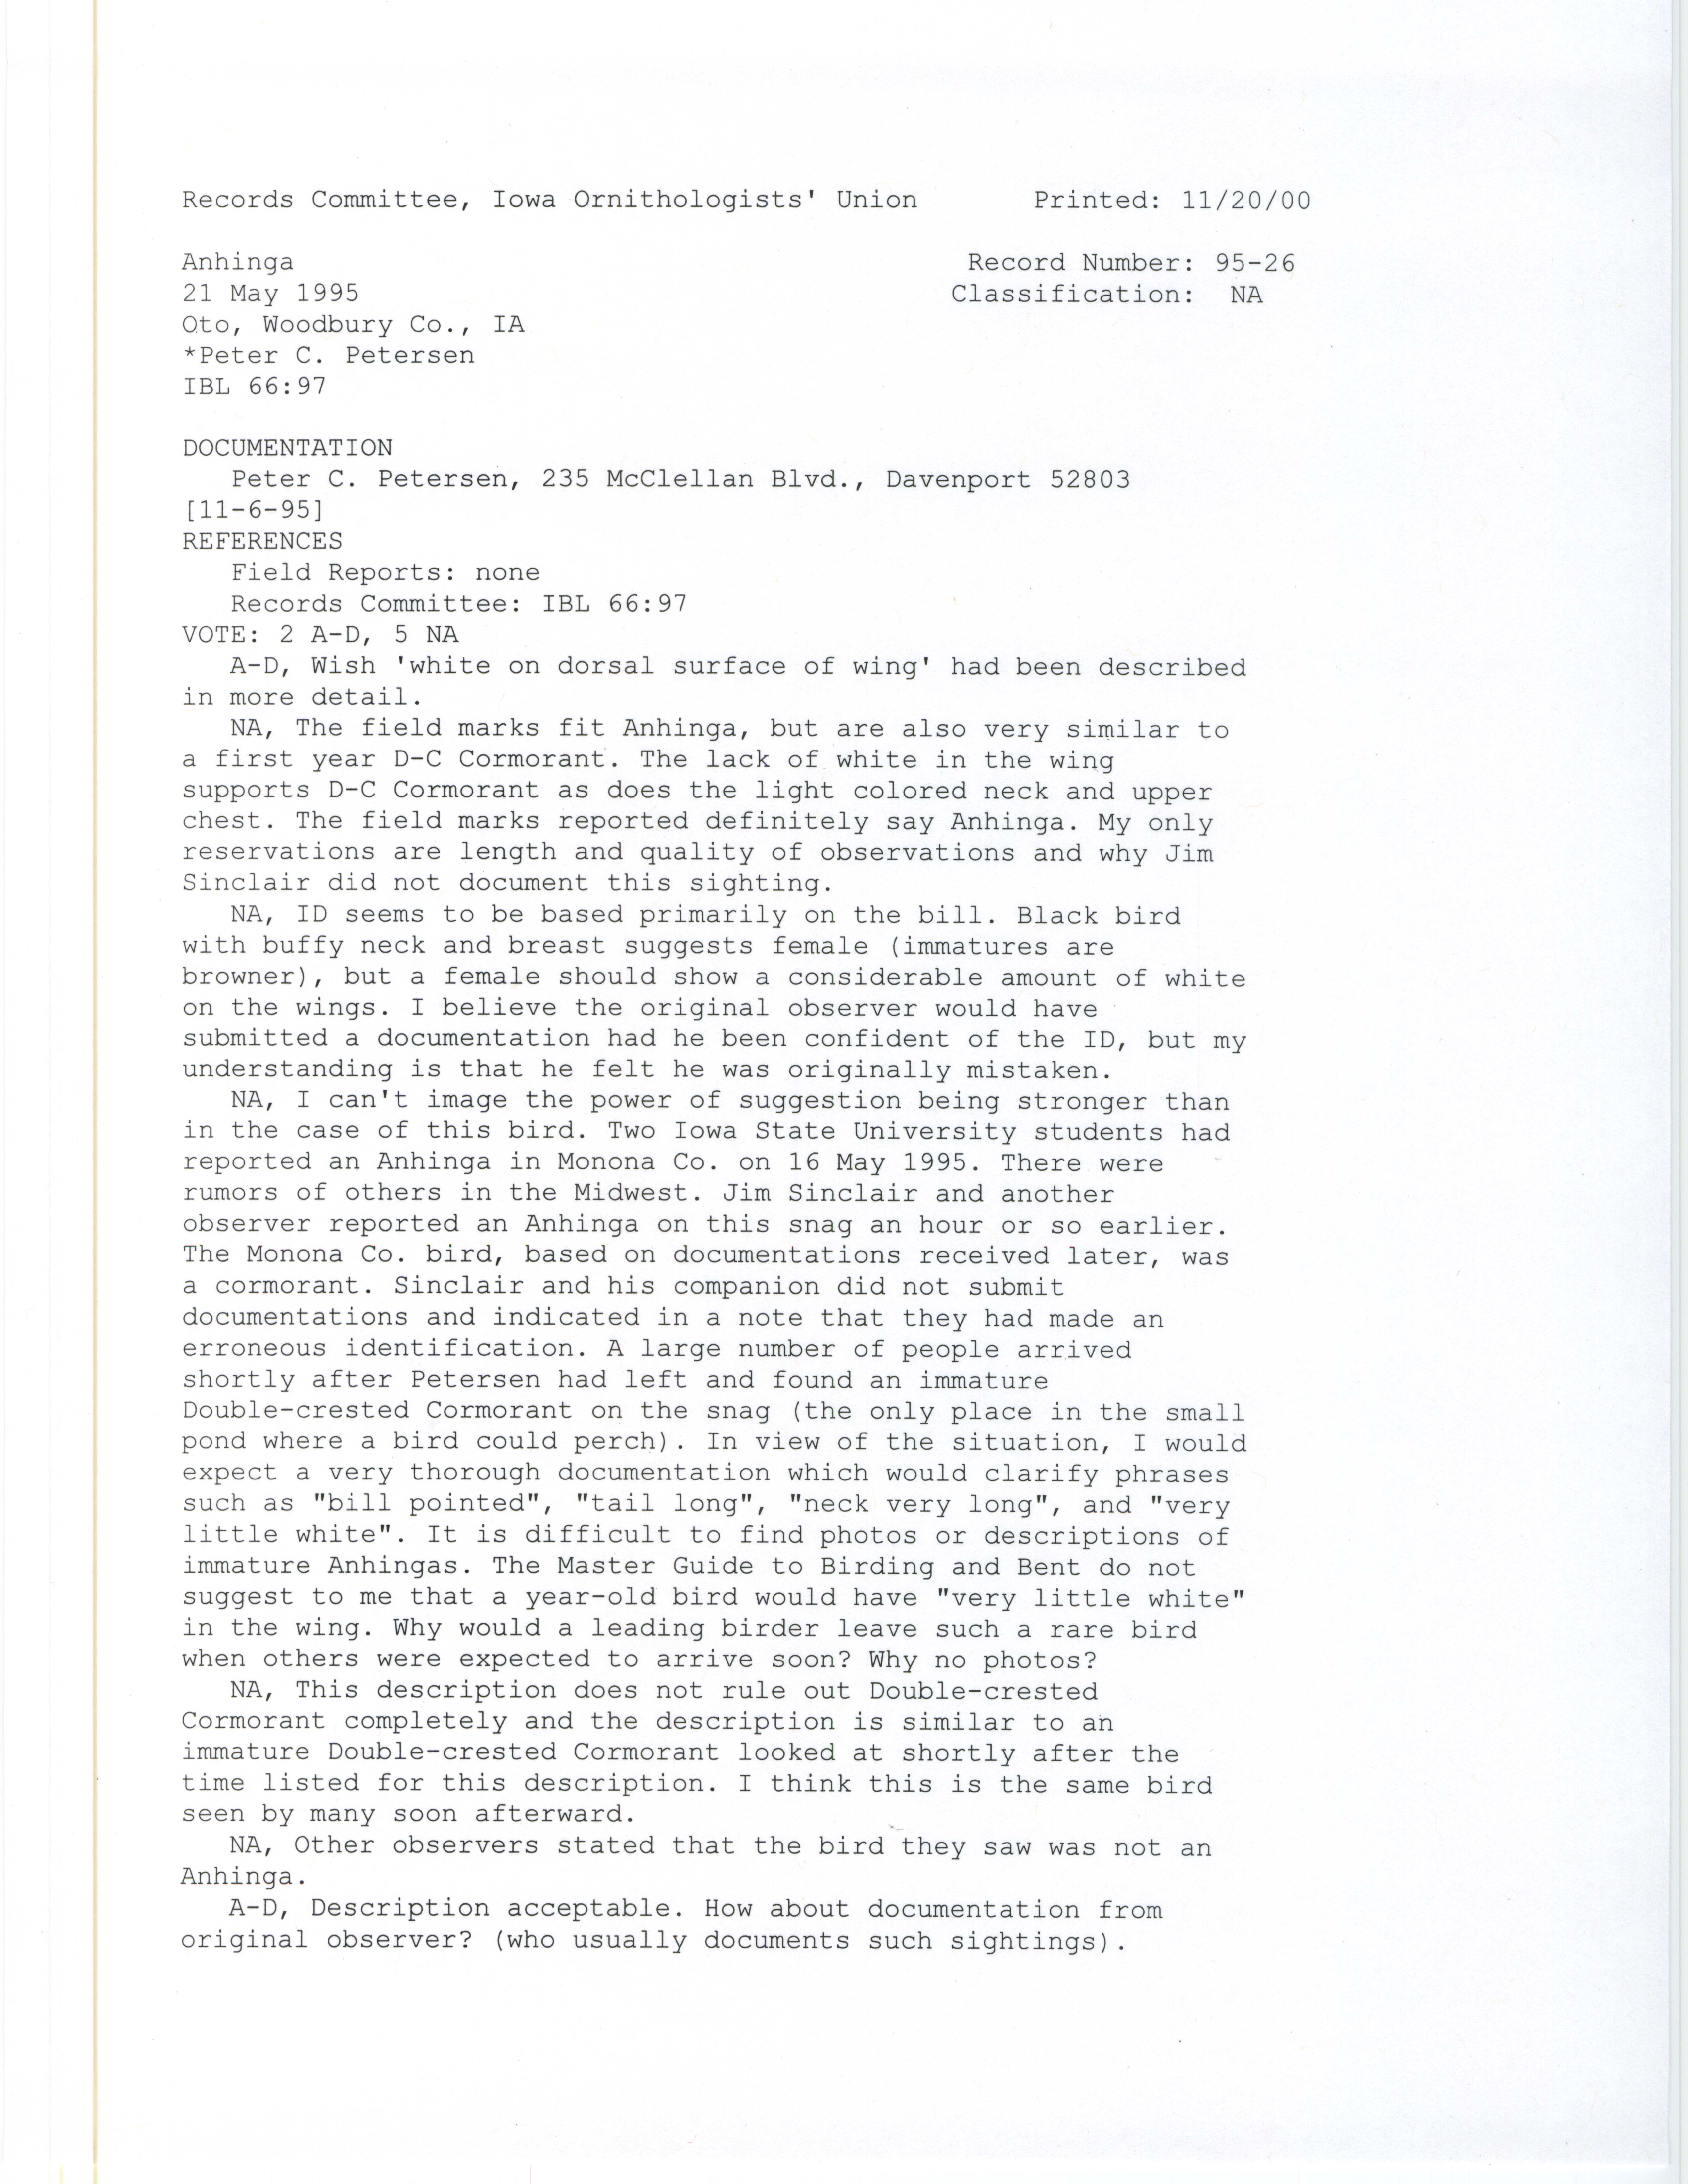 Records Committee review for rare bird sighting of Anhinga at Oto, 1995